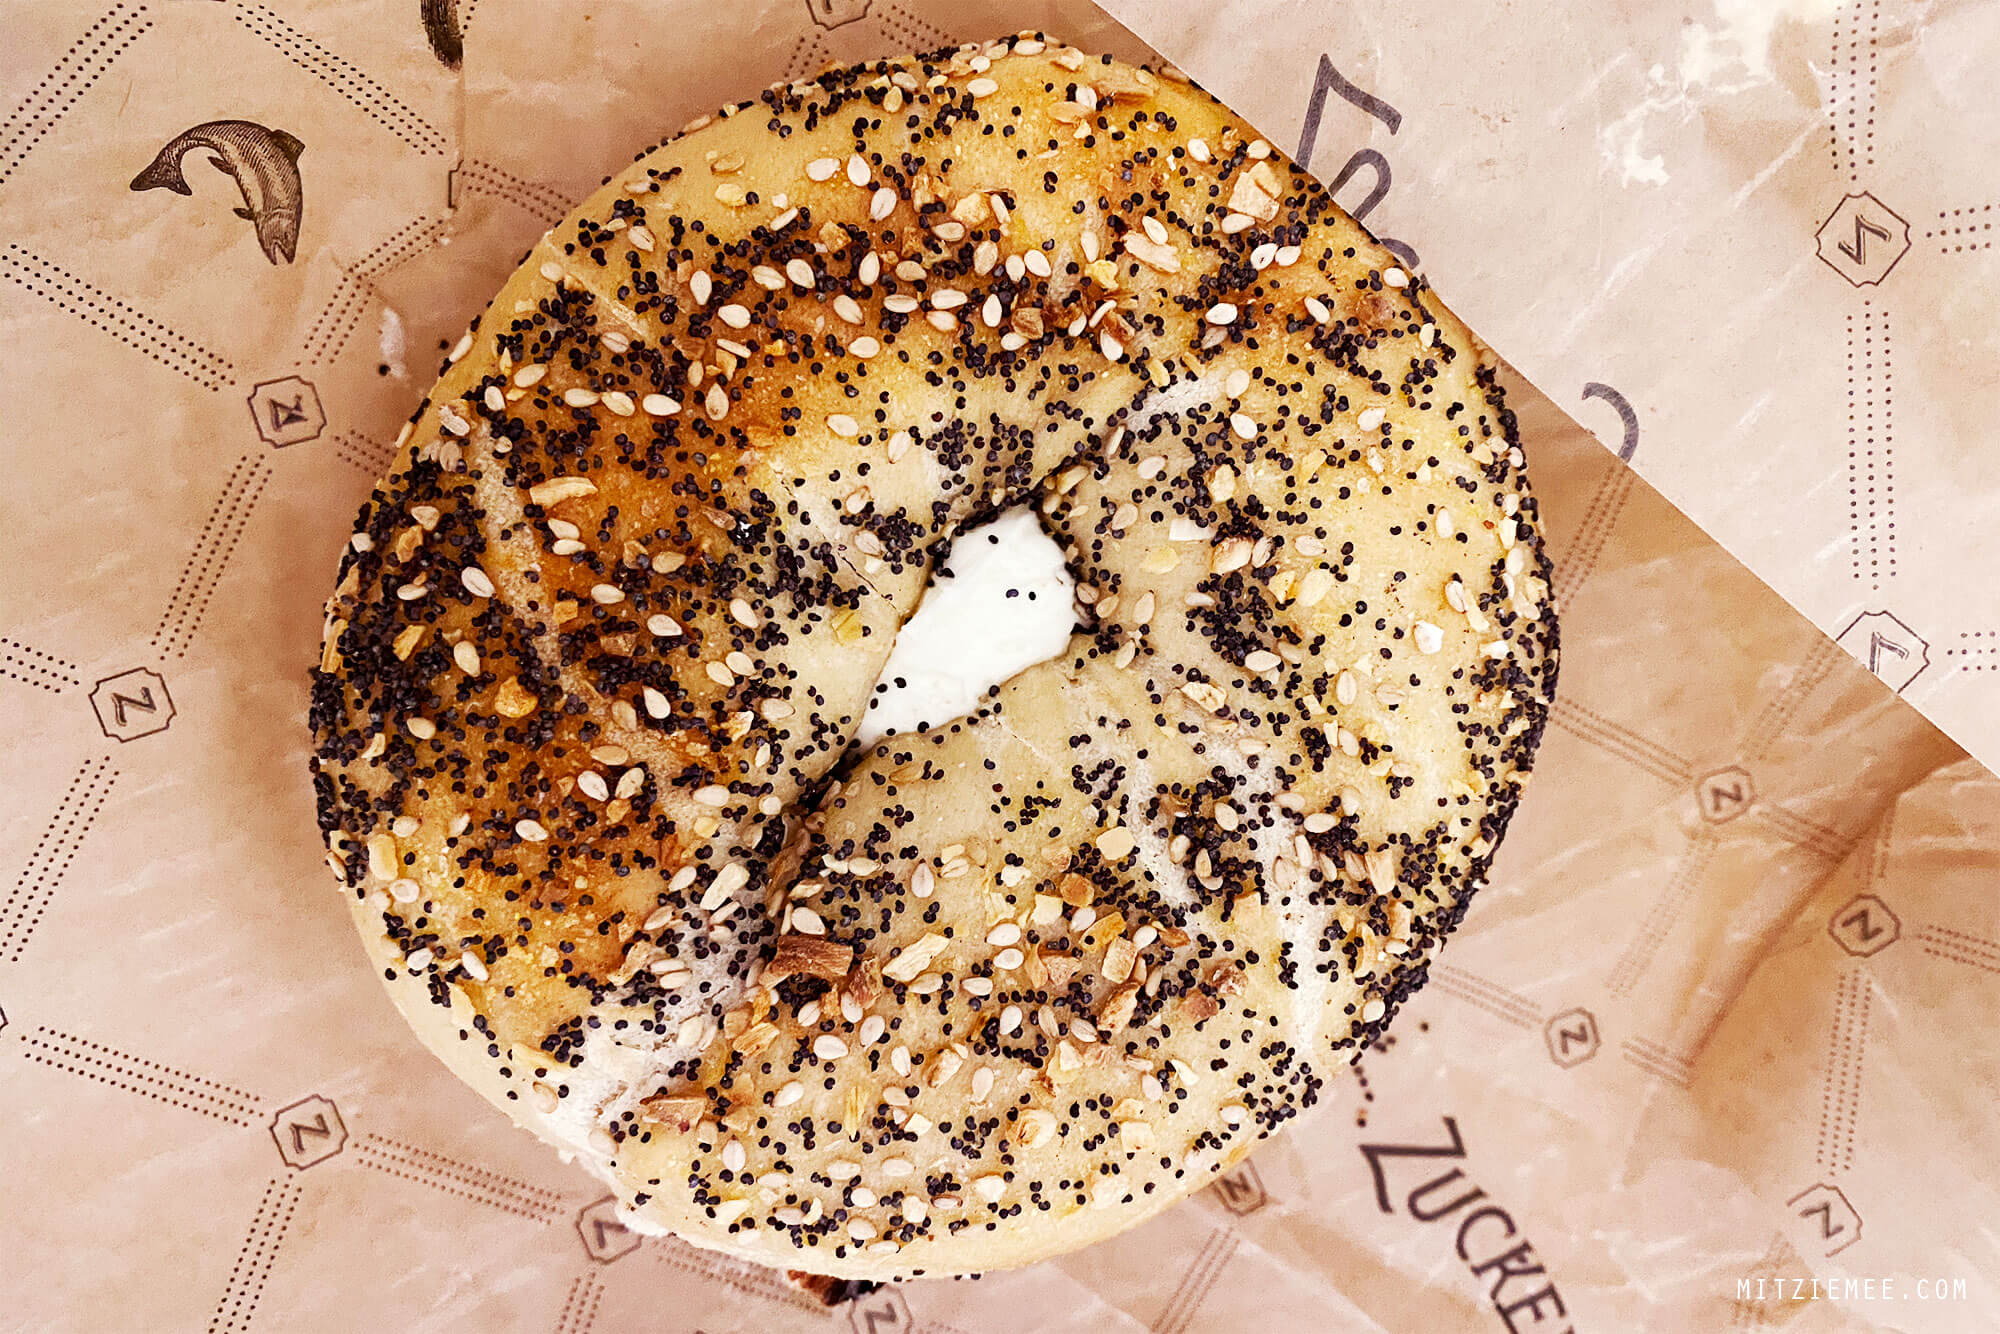 The Everything Bagel at Zucker's New York City